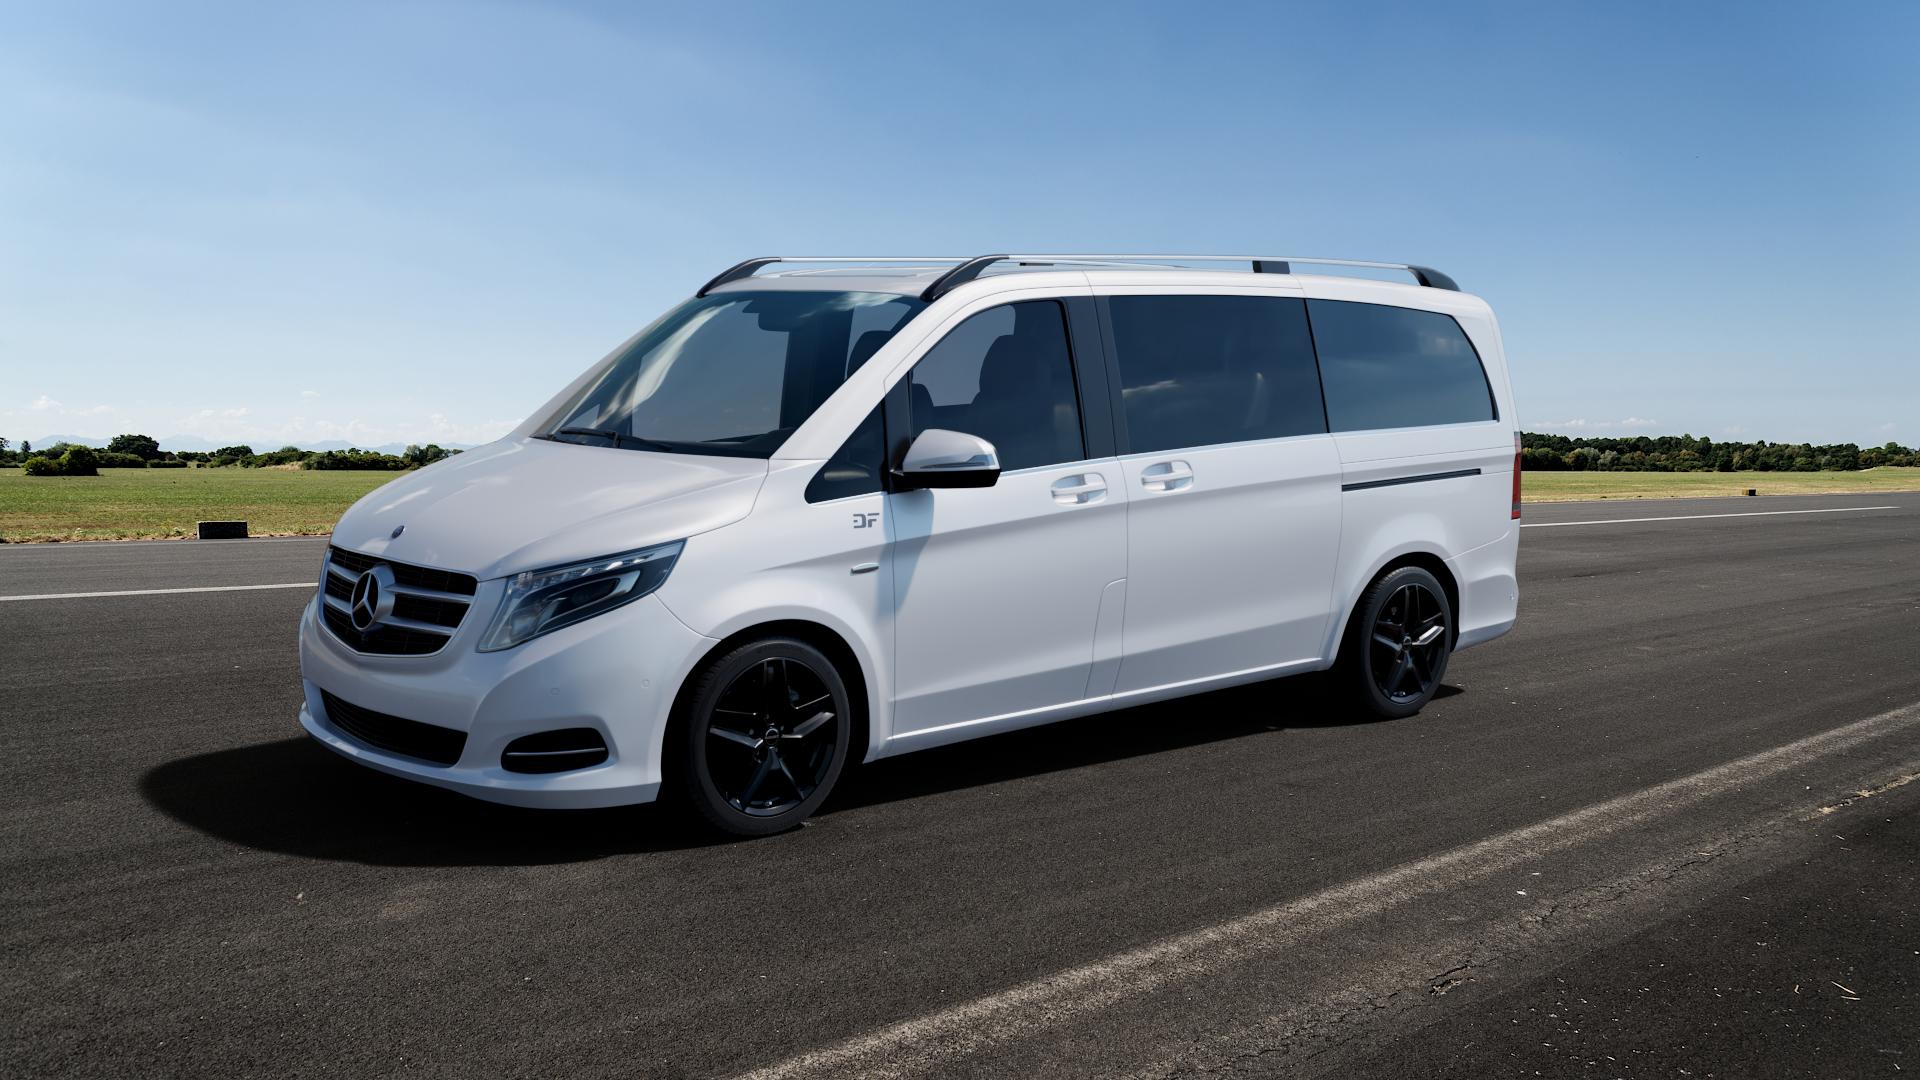 Mercedes V-Class Type W447 Marco Polo 2,1l V 200d 4Matic 100kW (136 hp)  Wheels and Tyre Packages | velonity.com